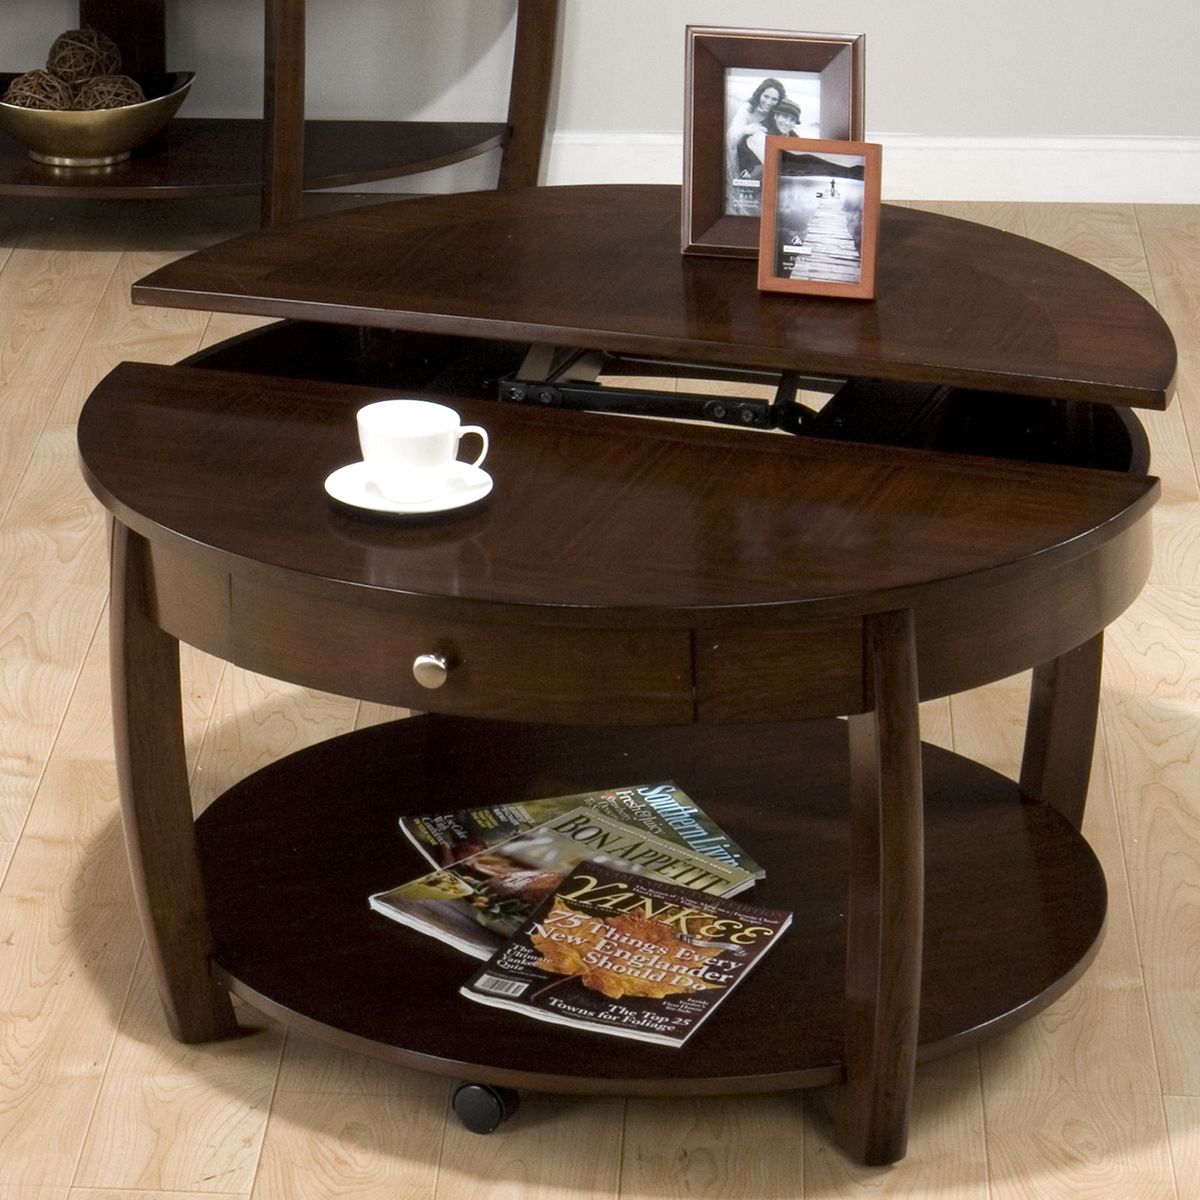 The Round Coffee Tables With Storage – The Simple And Compact Furniture Within Round Coffee Tables (View 5 of 20)